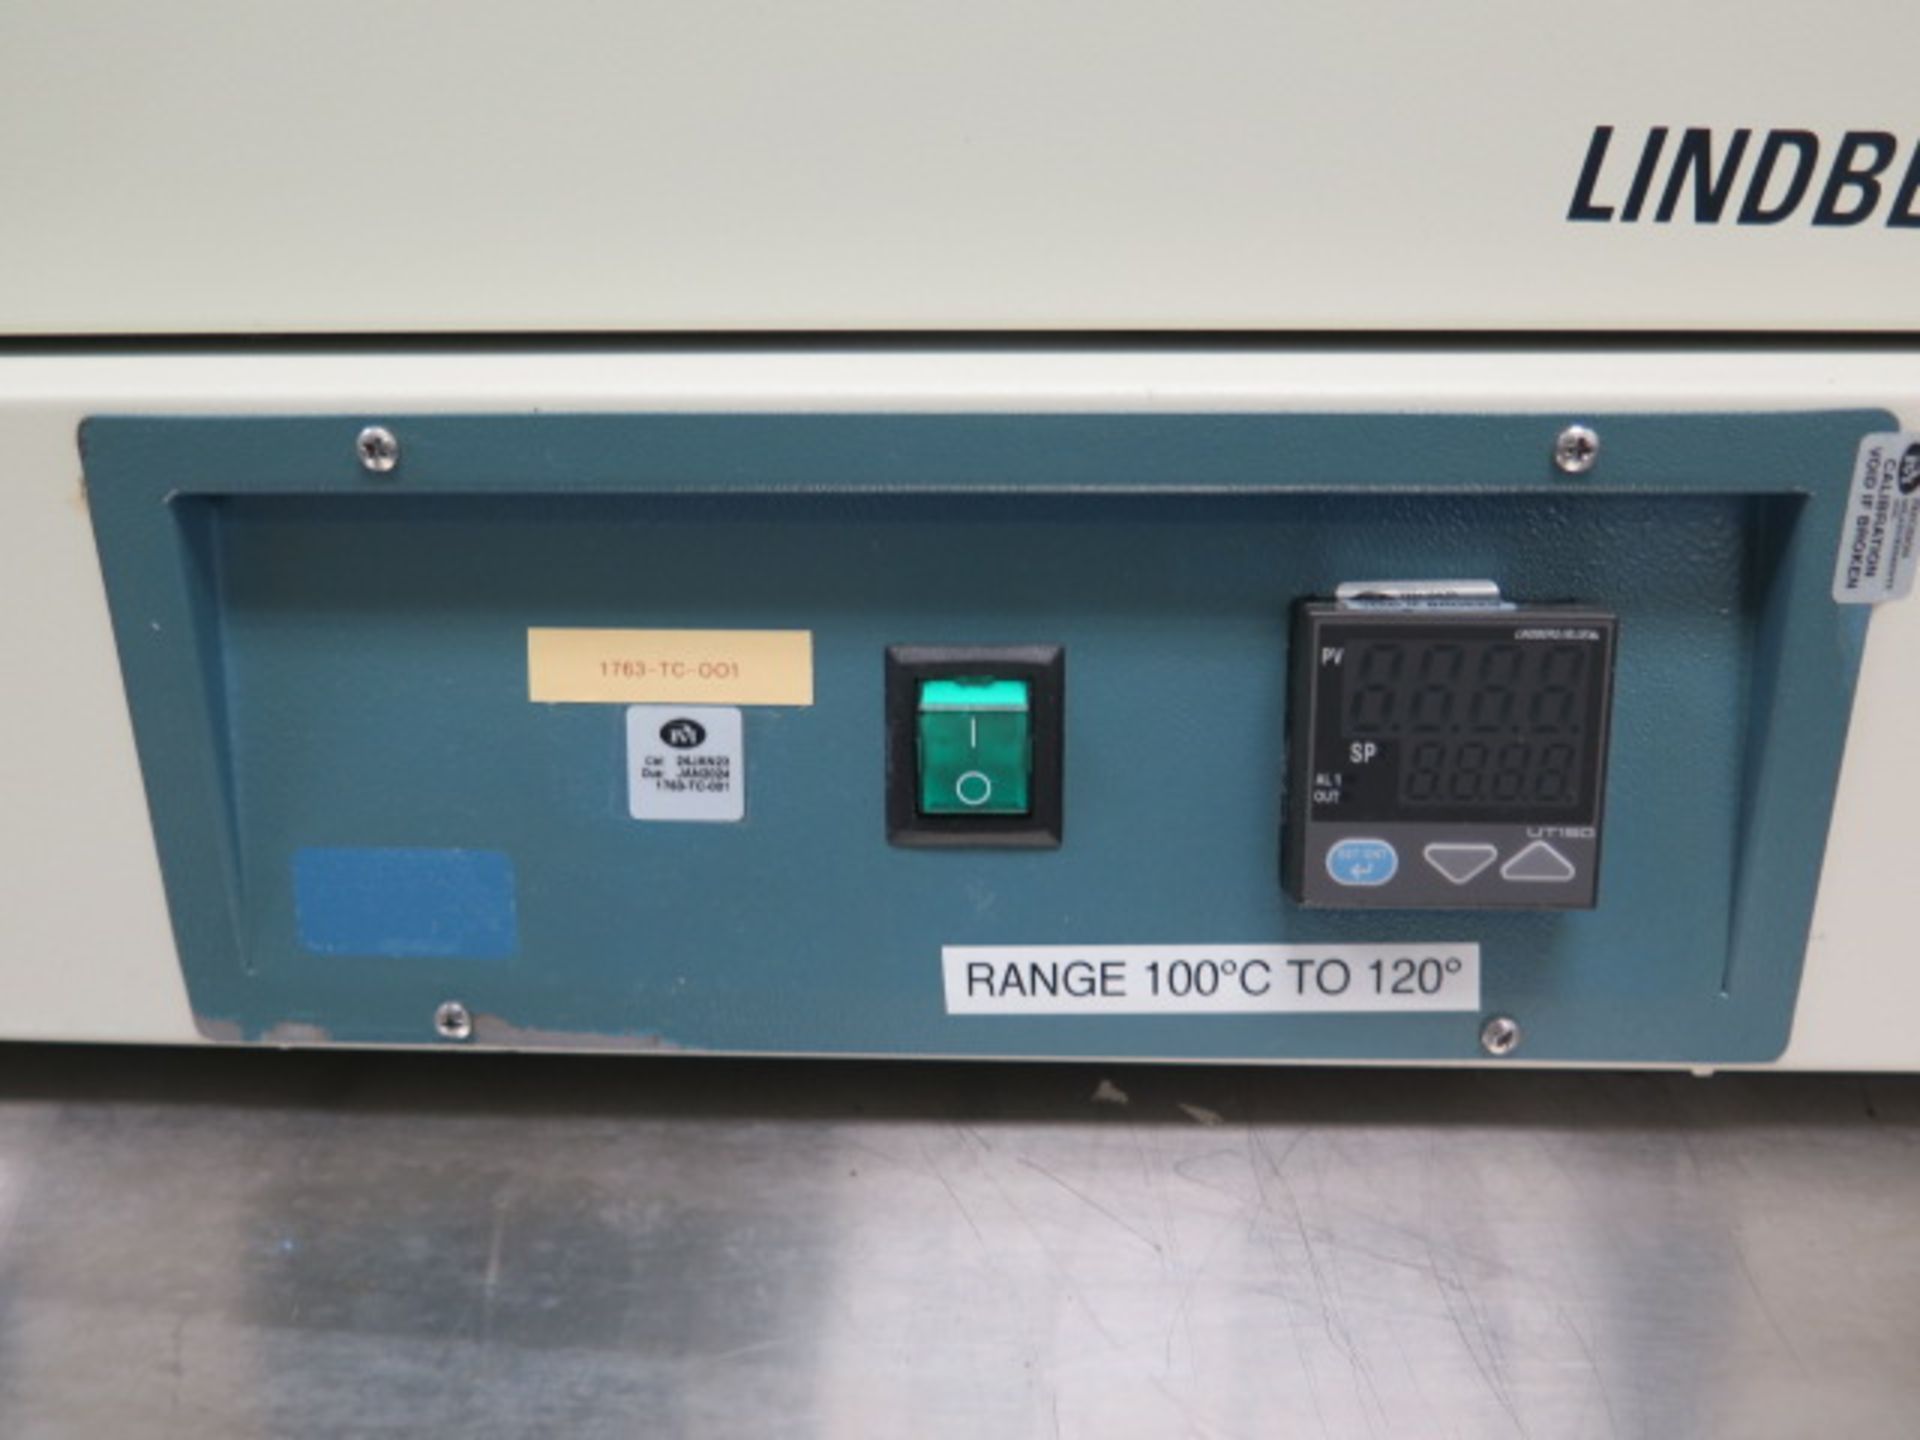 Thermo Electron Lindberg / BlueM mdl. V01218A Vacuum Oven s/n 9100734 (SOLD AS-IS - NO WARRANTY) - Image 7 of 10